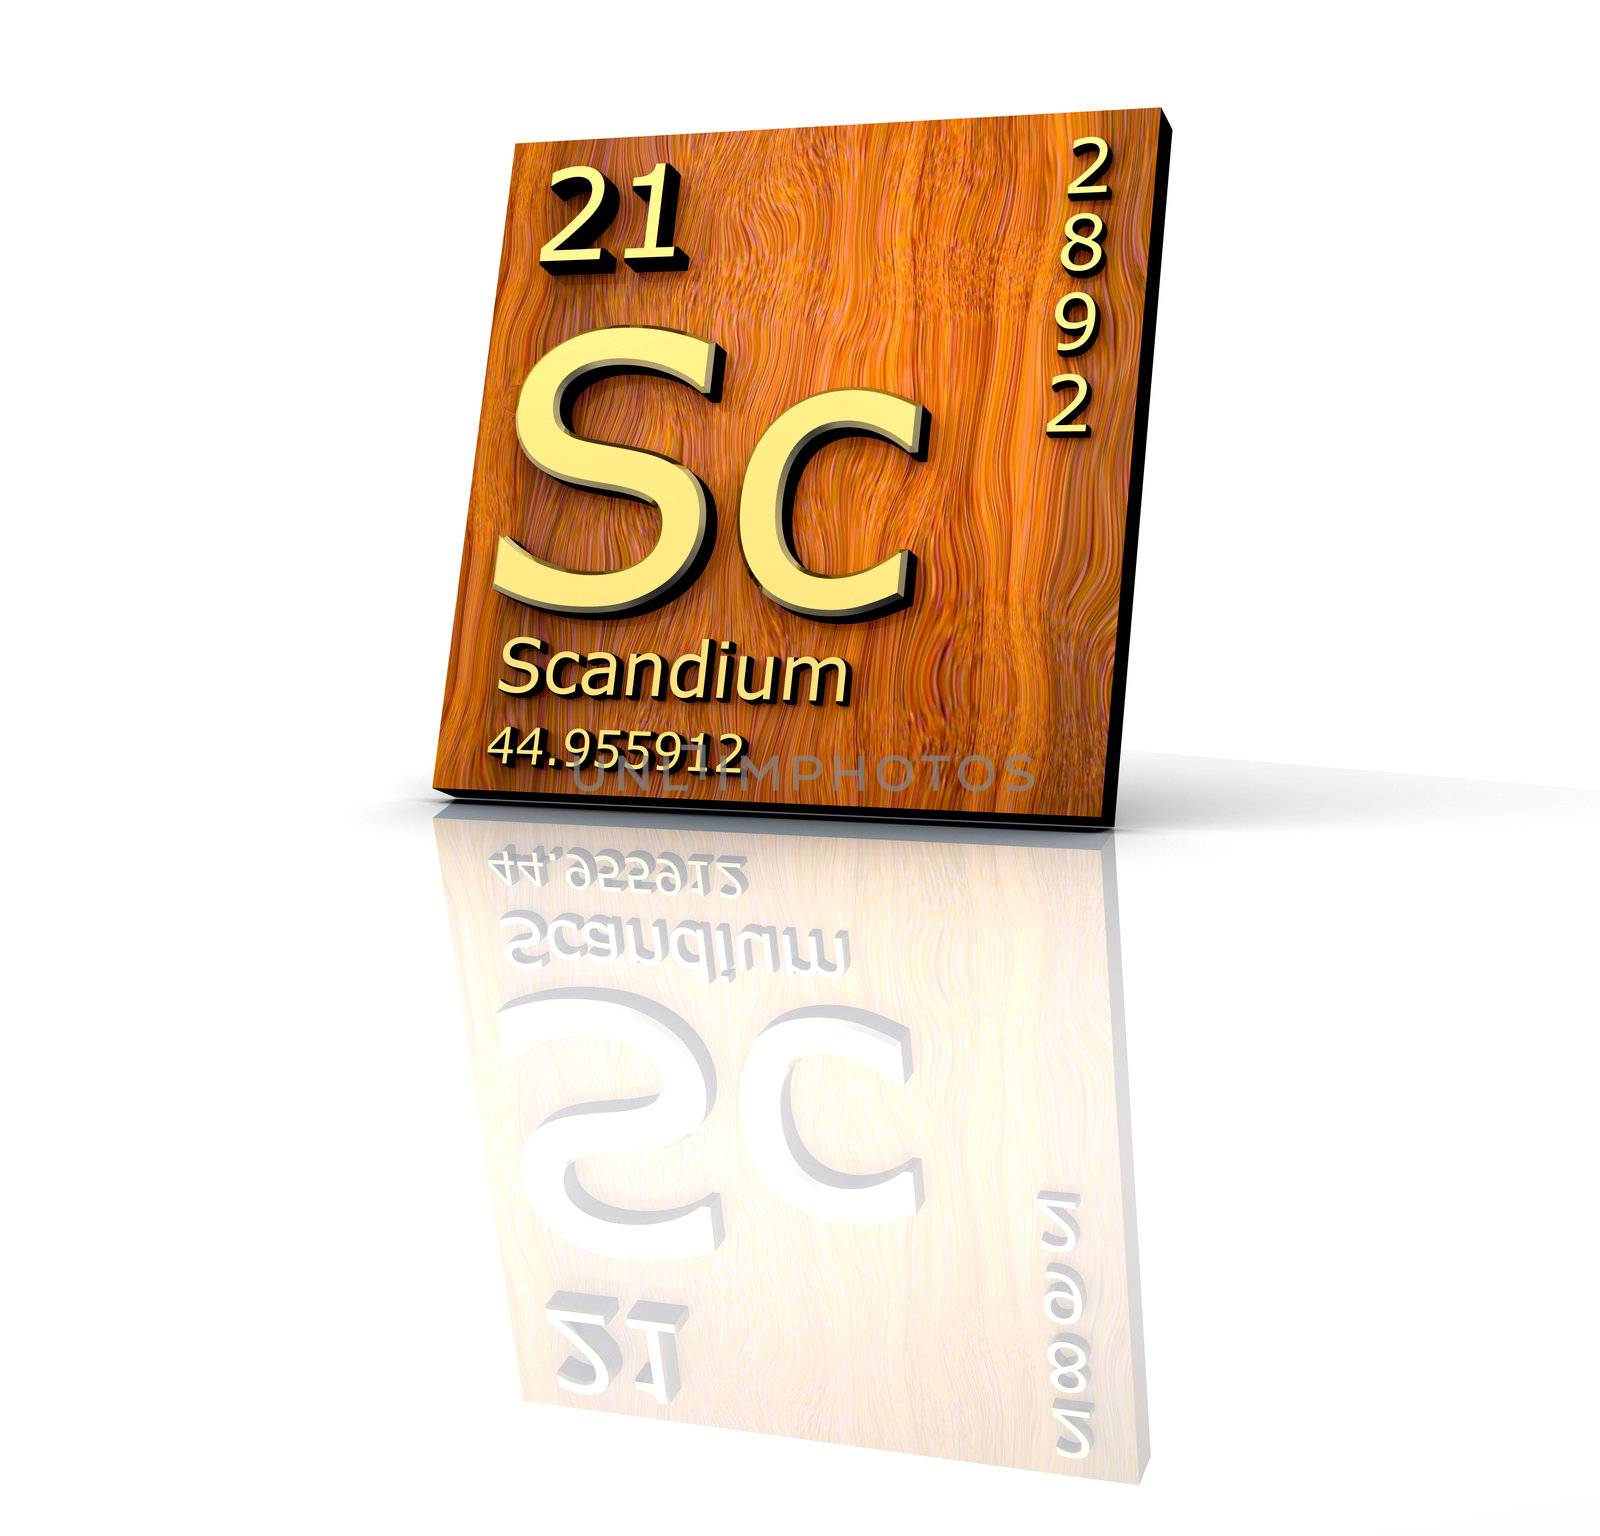 Scandium form Periodic Table of Elements - wood board - 3D made